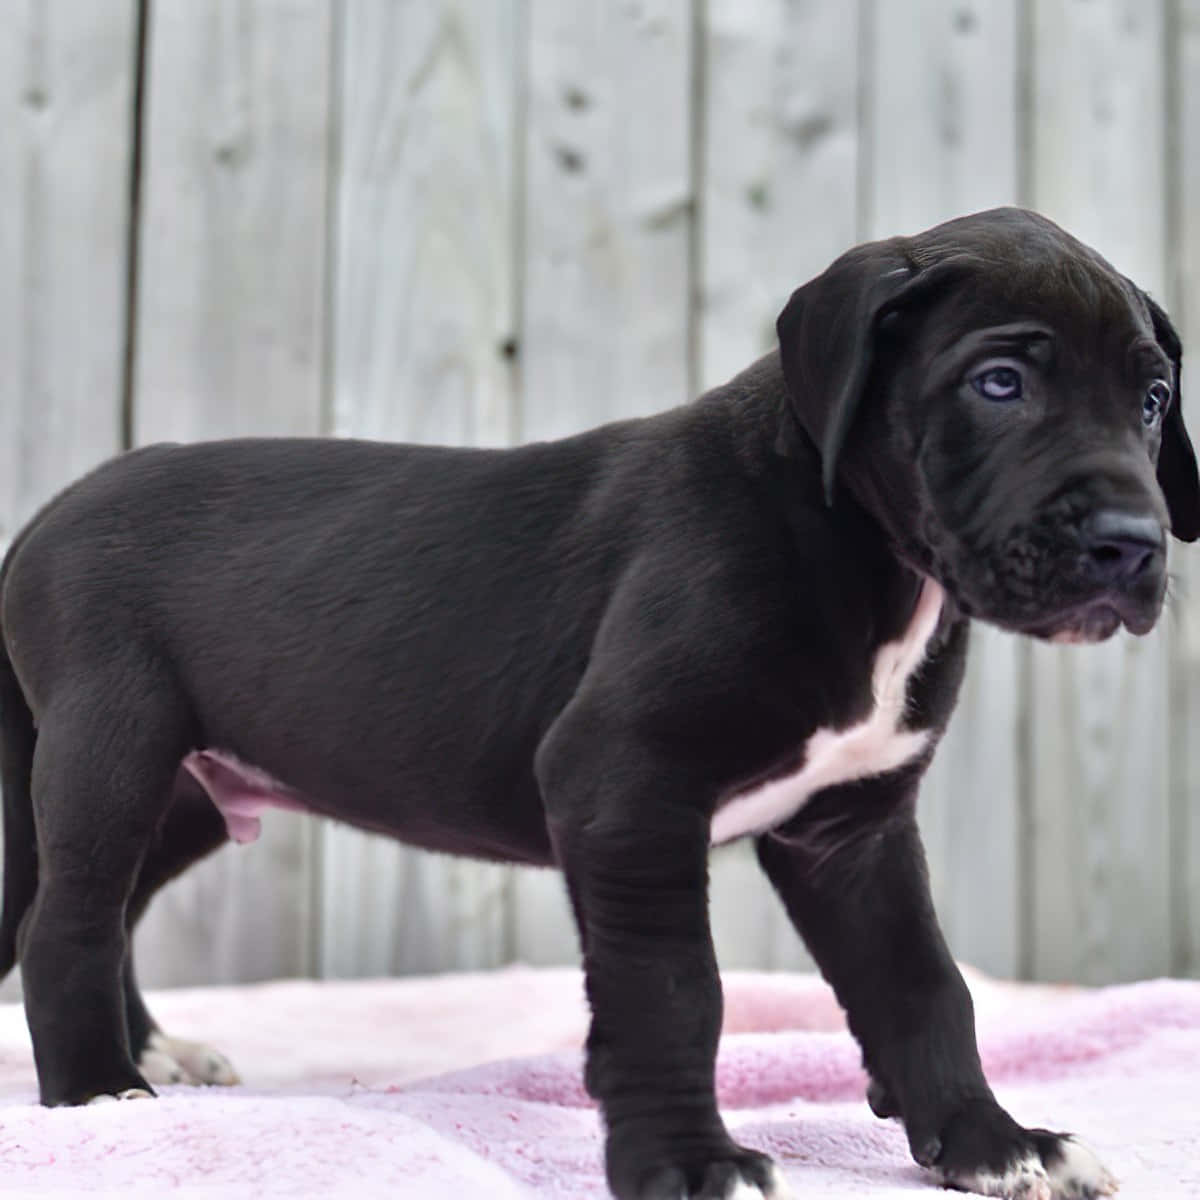 A litter of adorable Great Dane puppies with big personalities!